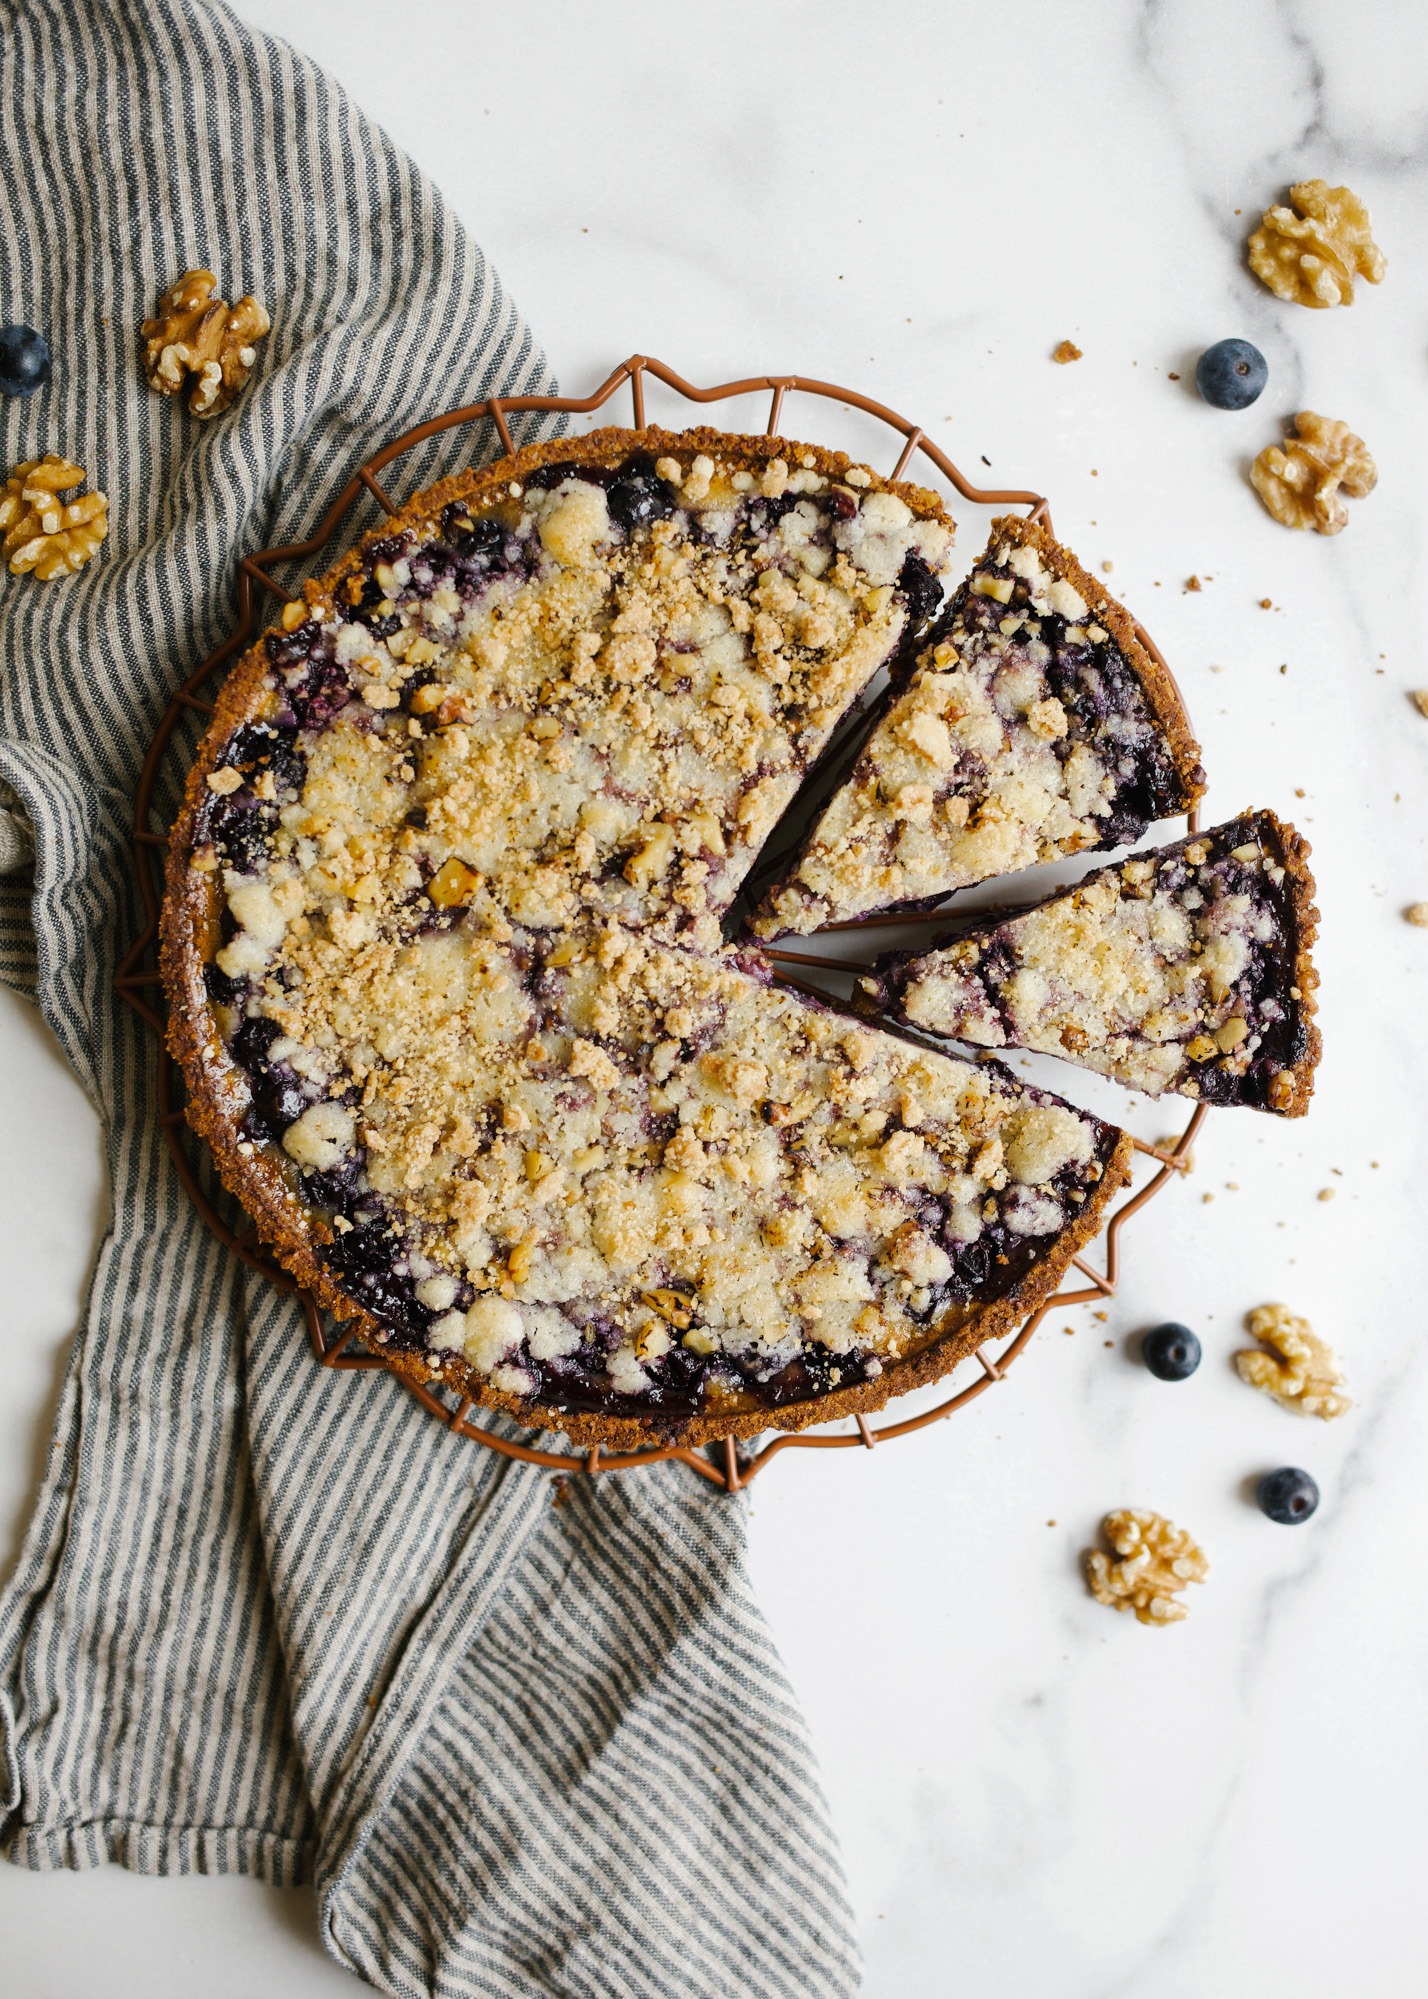 Blueberry Sour Cream Pie with walnuts.